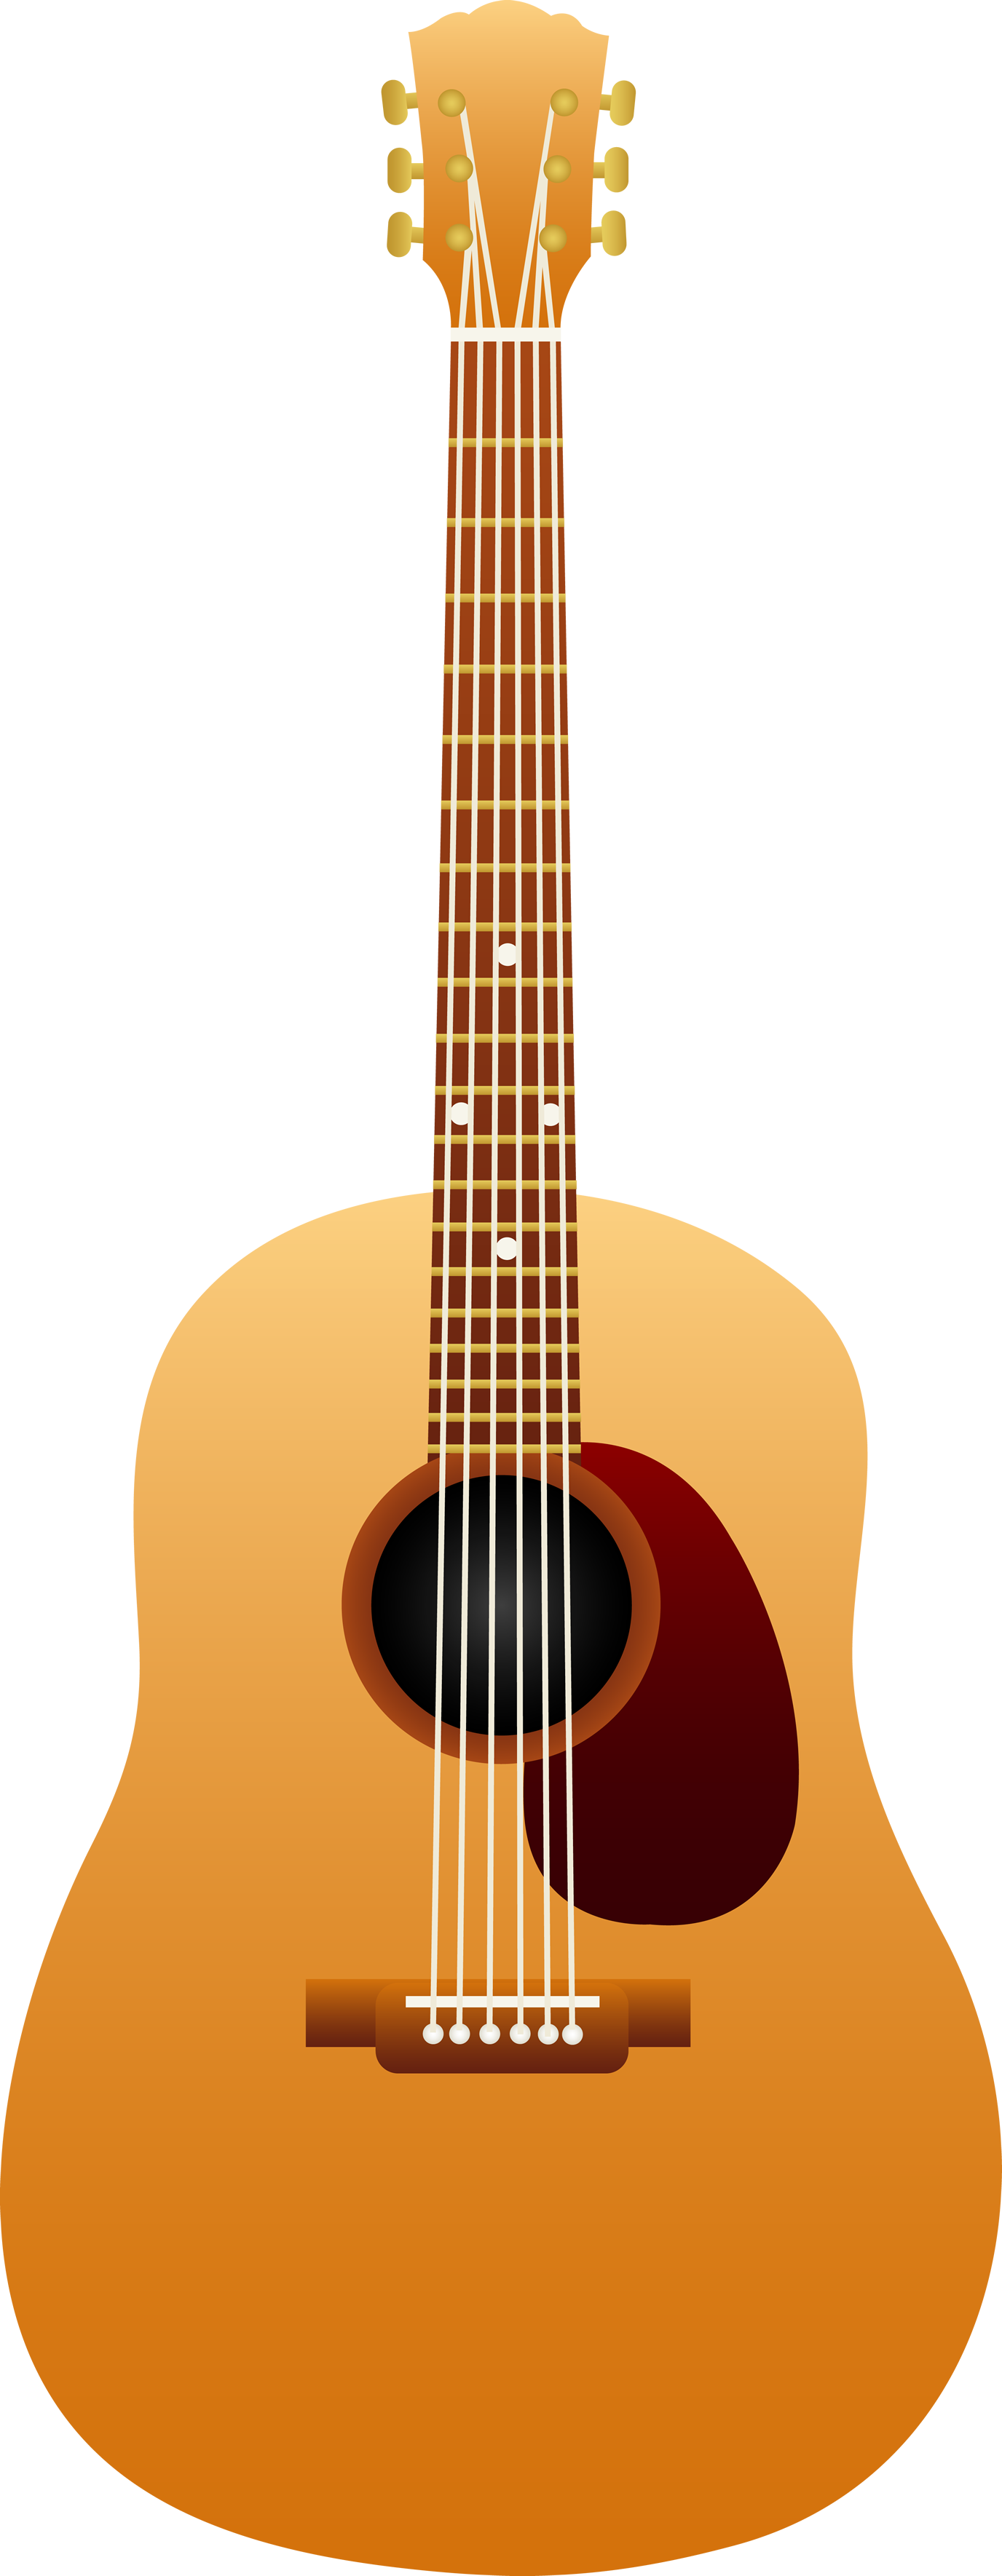 Guitare Telecharger PNG